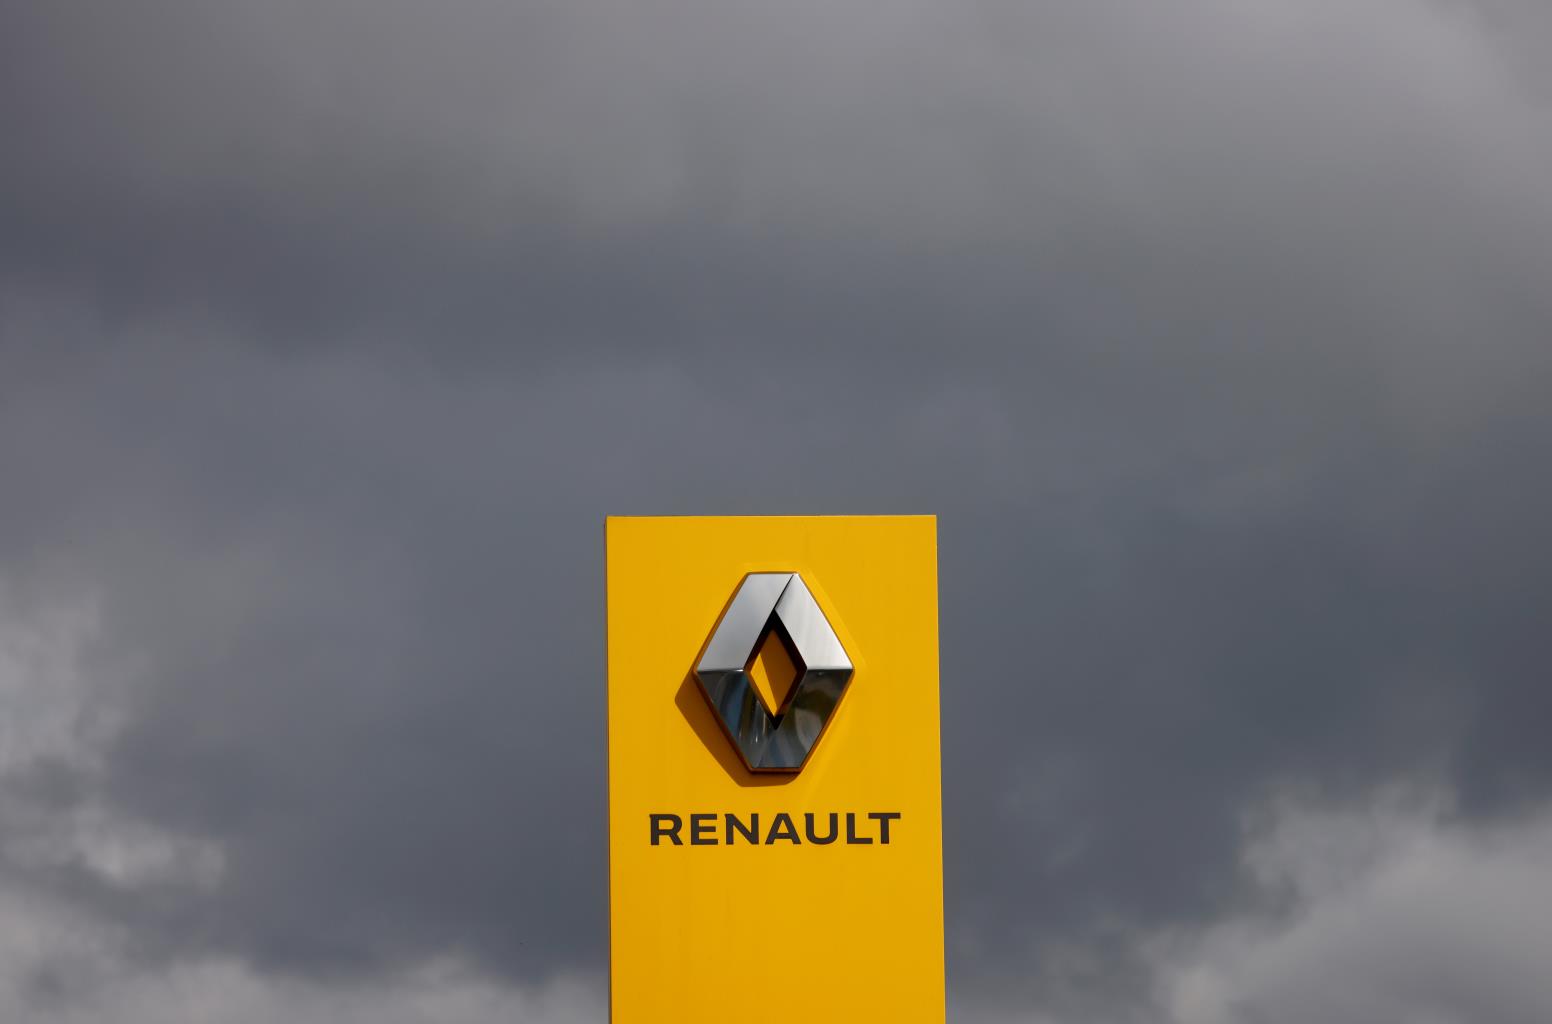 The logo of Renault carmaker is pictured at a dealership in Les Sorinieres, near Nantes, France, September 9, 2021. REUTERS/Stephane Mahe